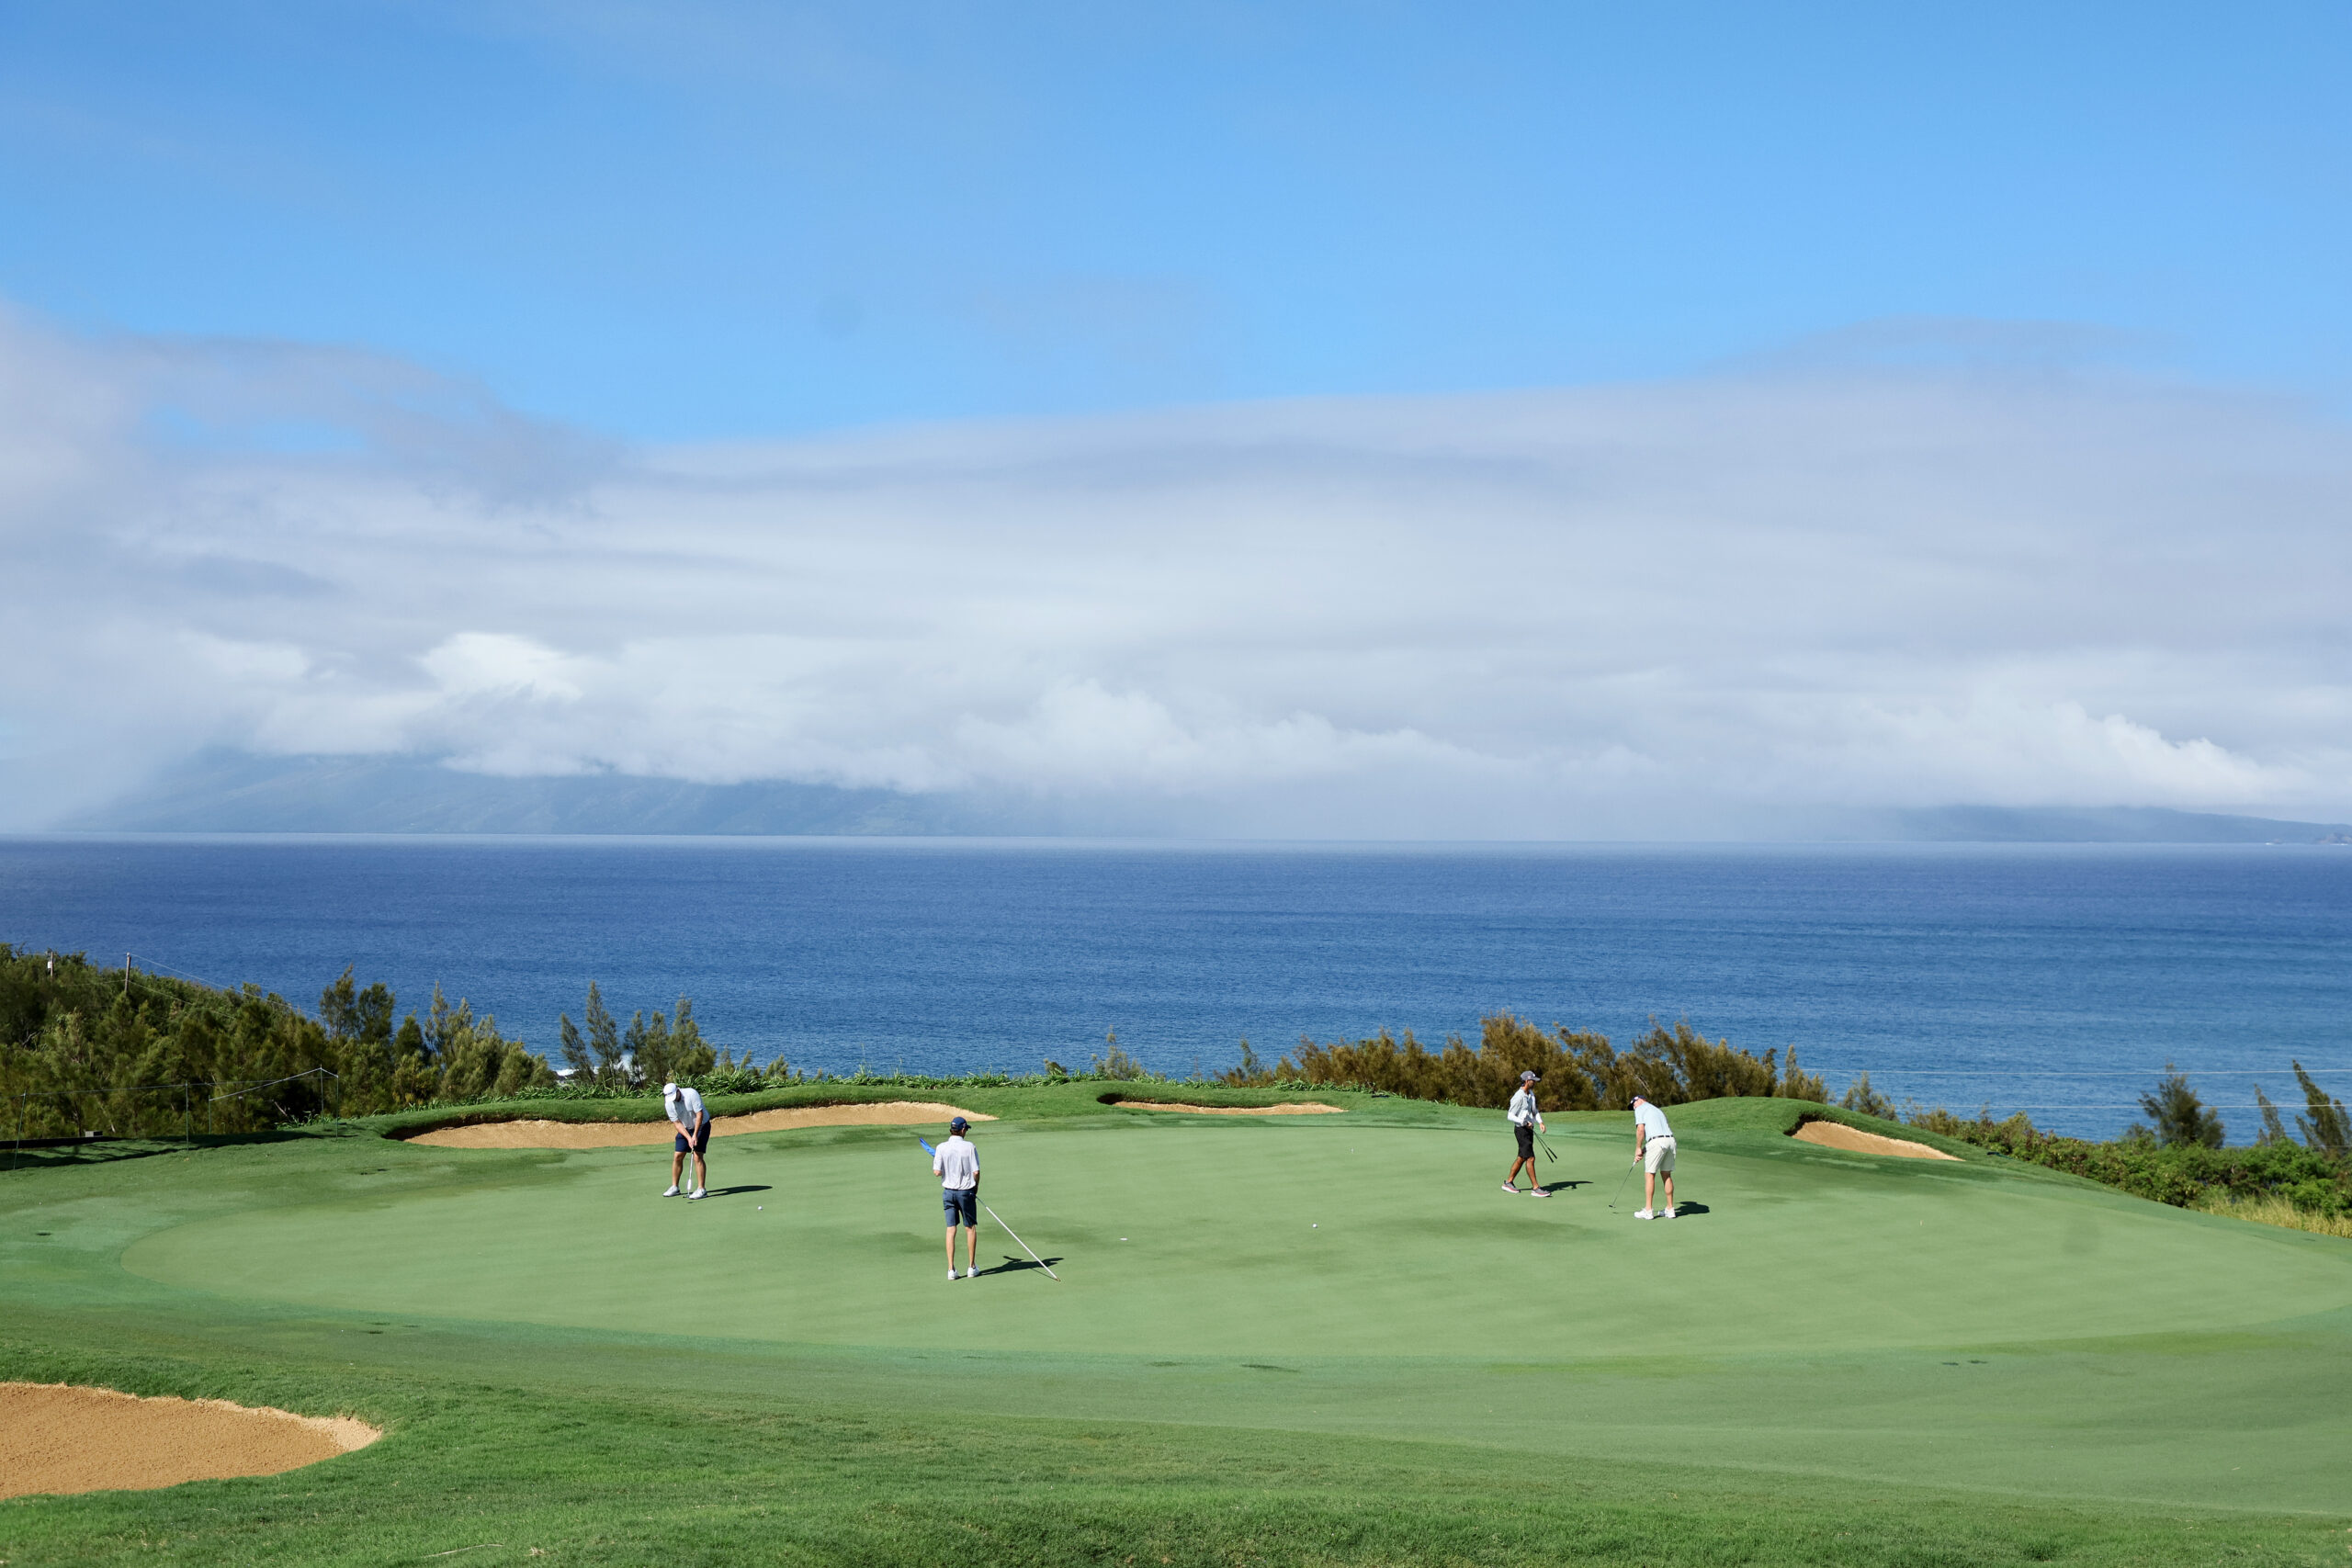 Dawn of the designated-event era begins in Sentry Tournament of Champions at Kapalua